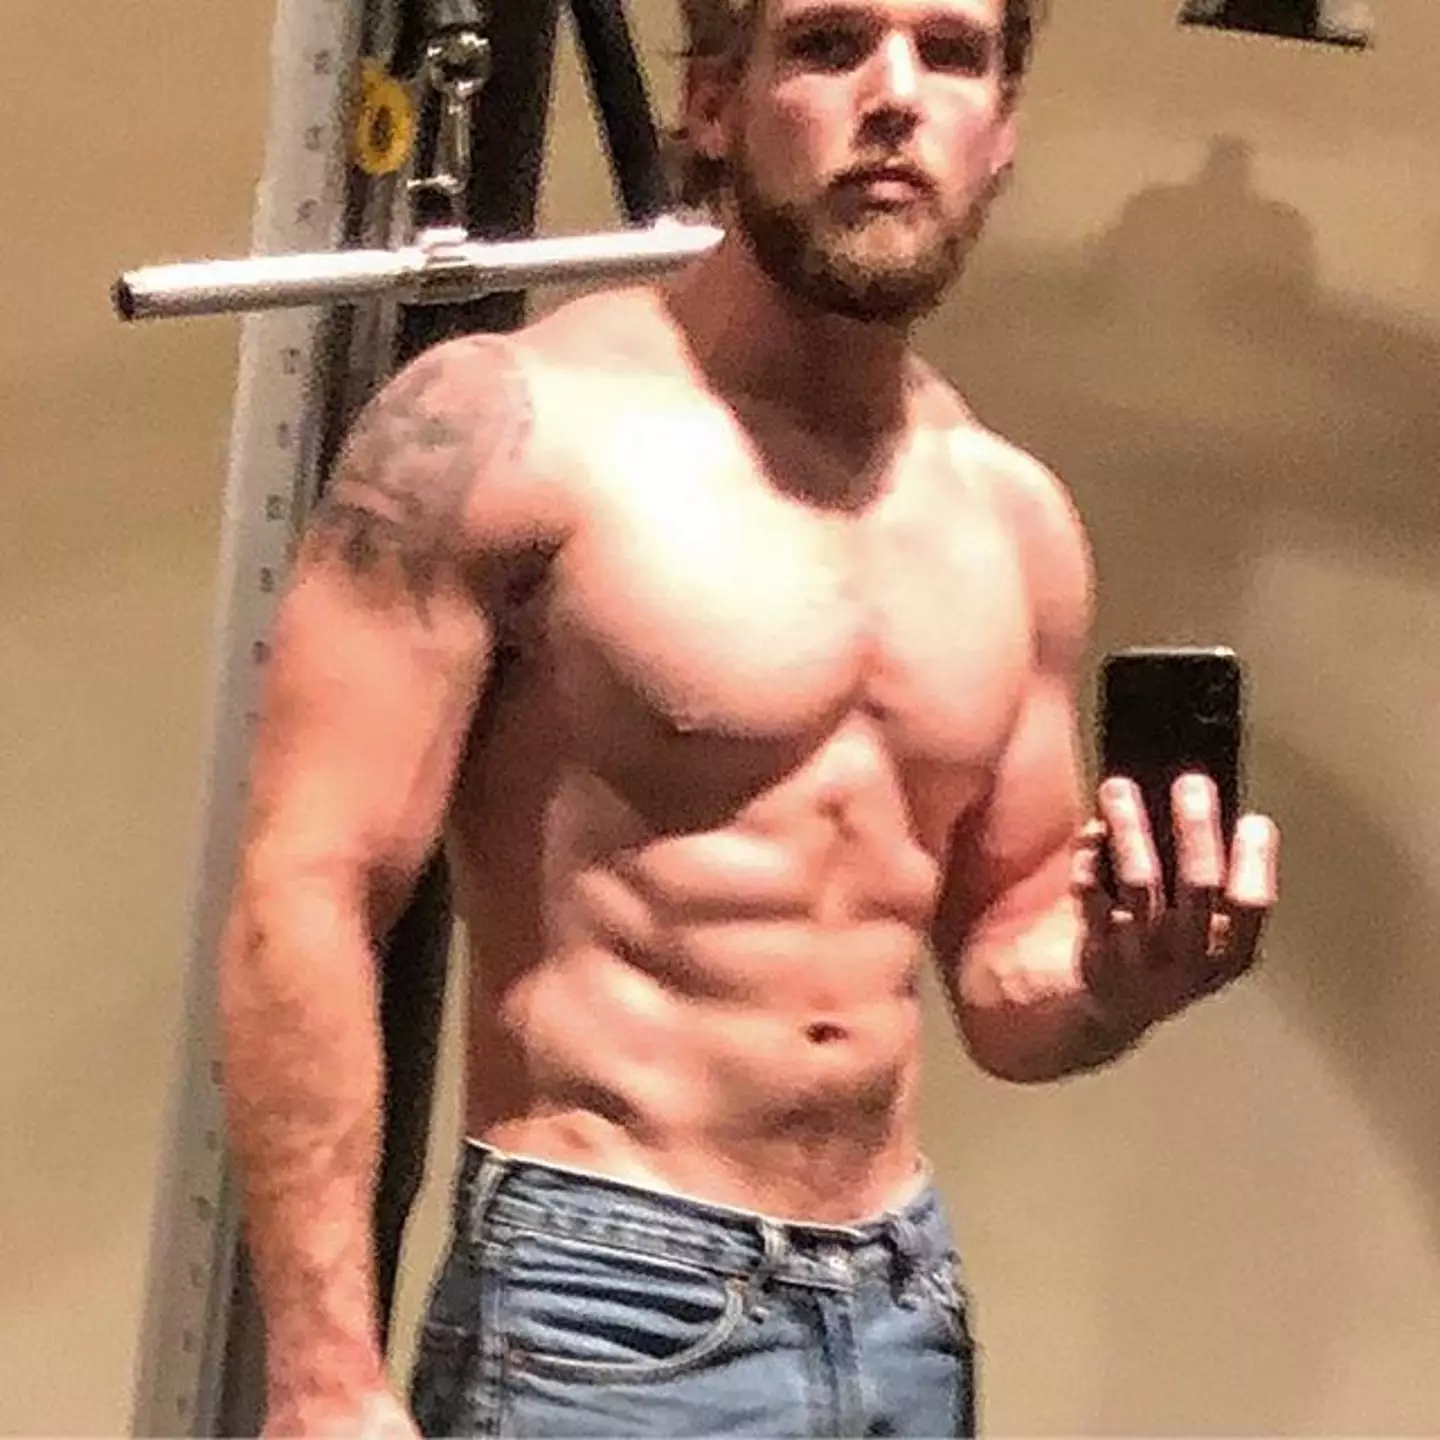 Max Thieriot took working out seriously when he was cast in SEAL Team.